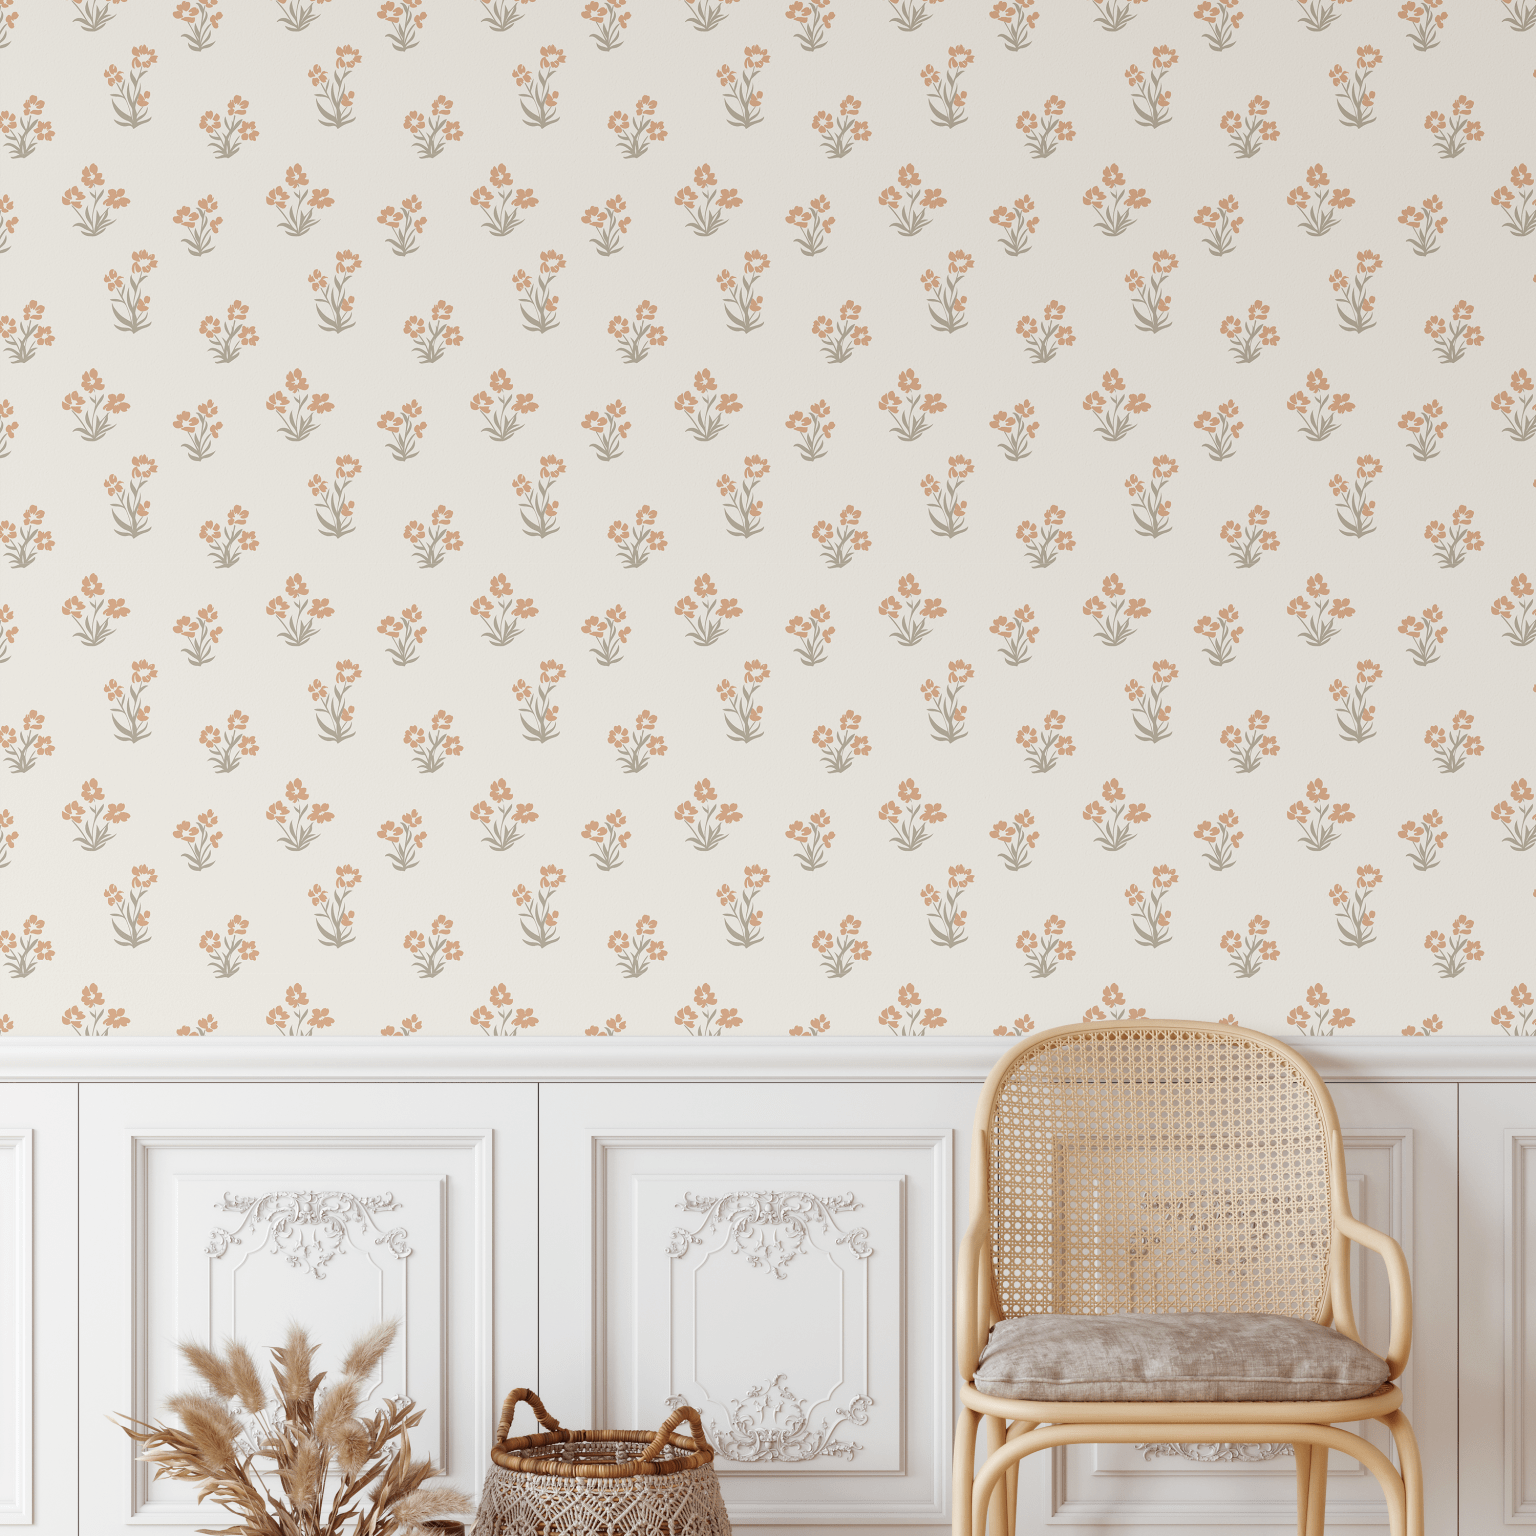 Sage sprig peel and stick wallpaper in a fresh, neutral tone enhances a traditional entryway with wainscoting.